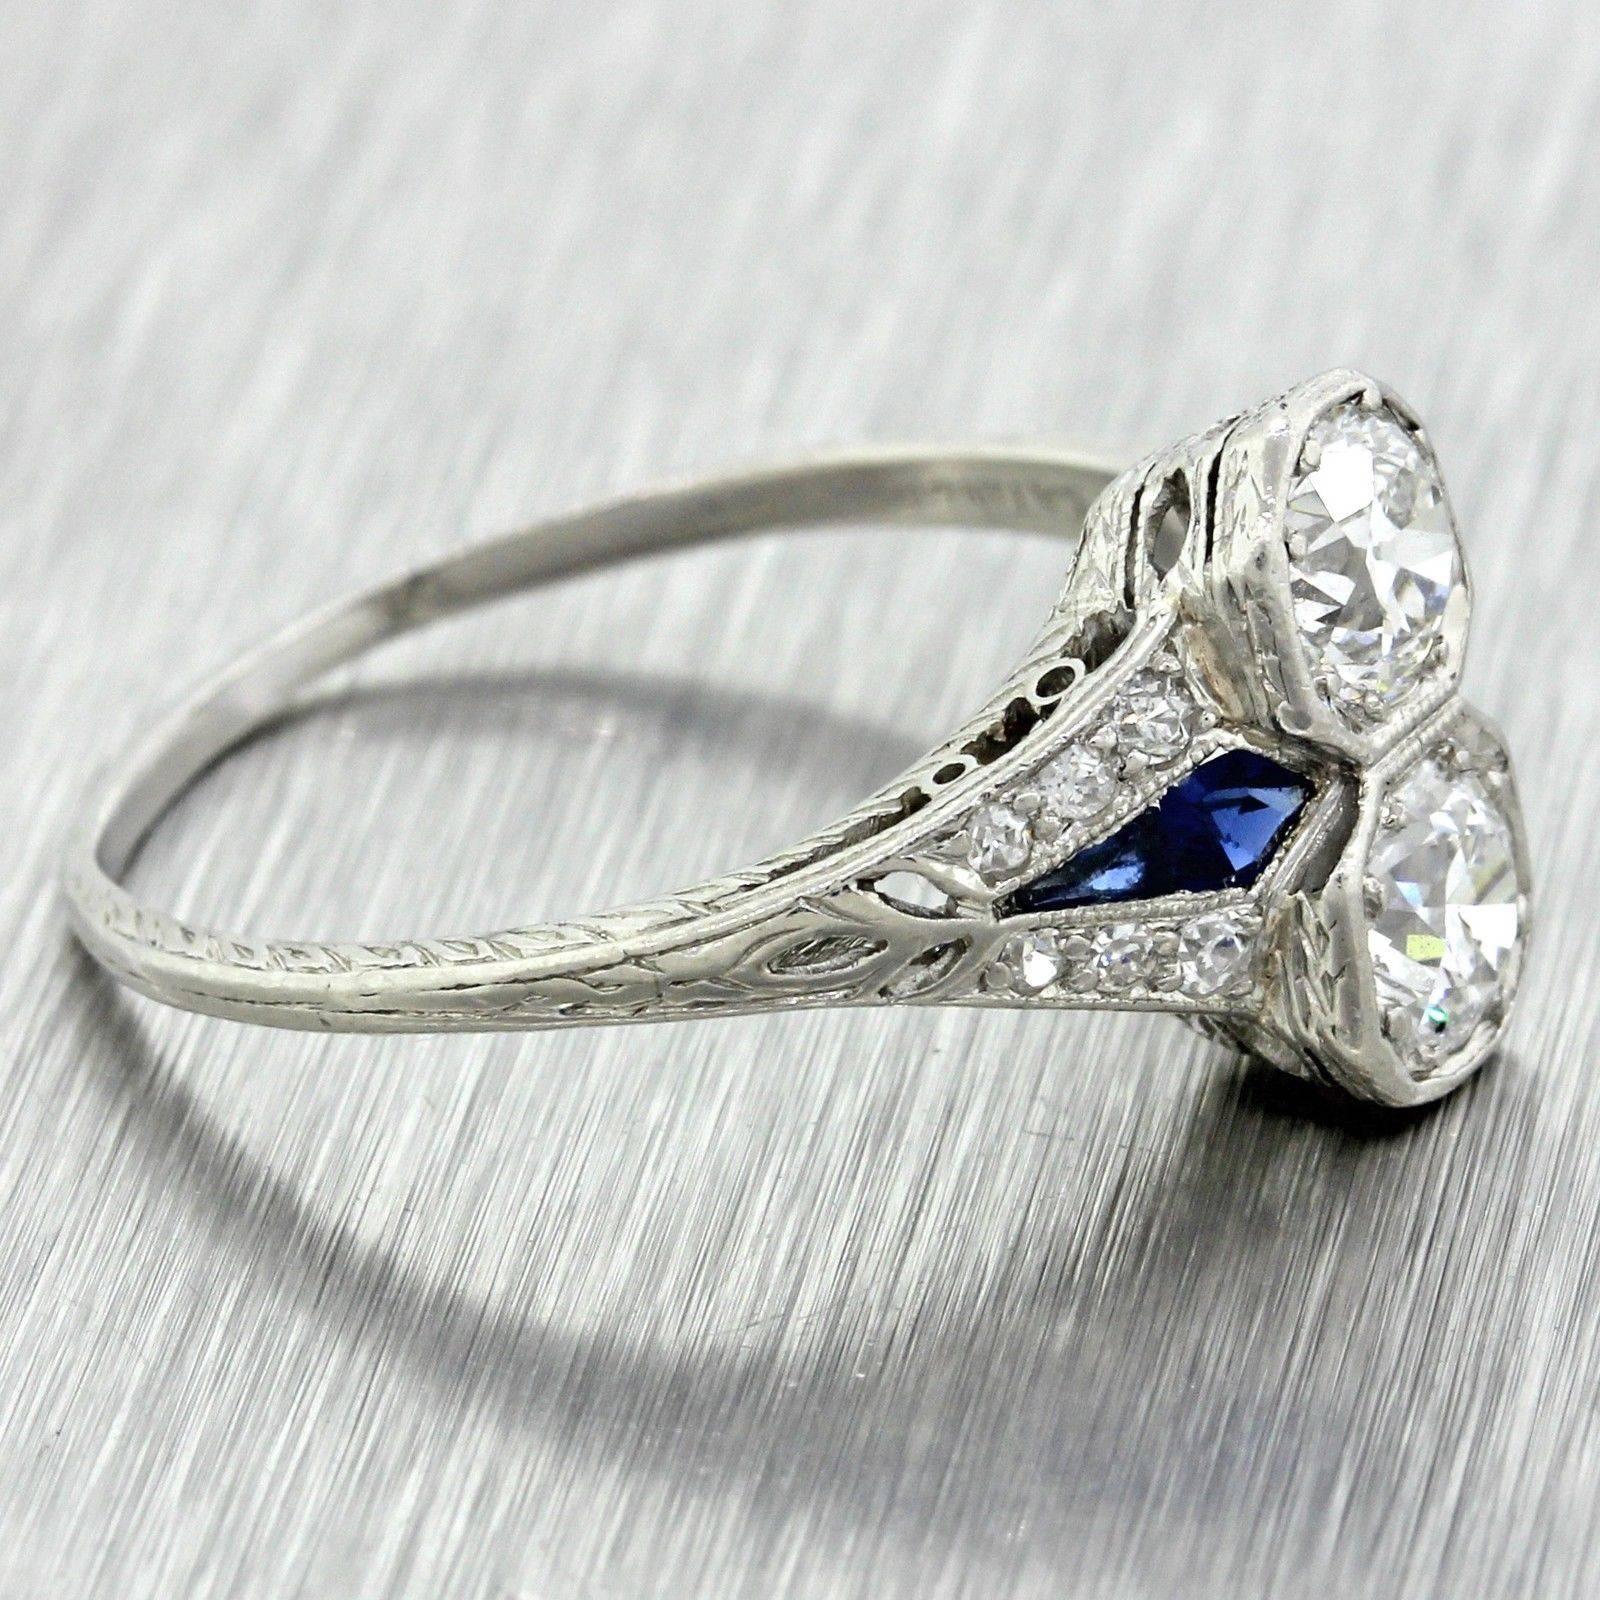 This is a beautiful antique art deco platinum diamond and sapphire engagement ring that can dated back to the 1920's. This ring suggested retail price is $6,610.00 USD and was determined by world-renowned EGL USA; one of the most reputable diamond